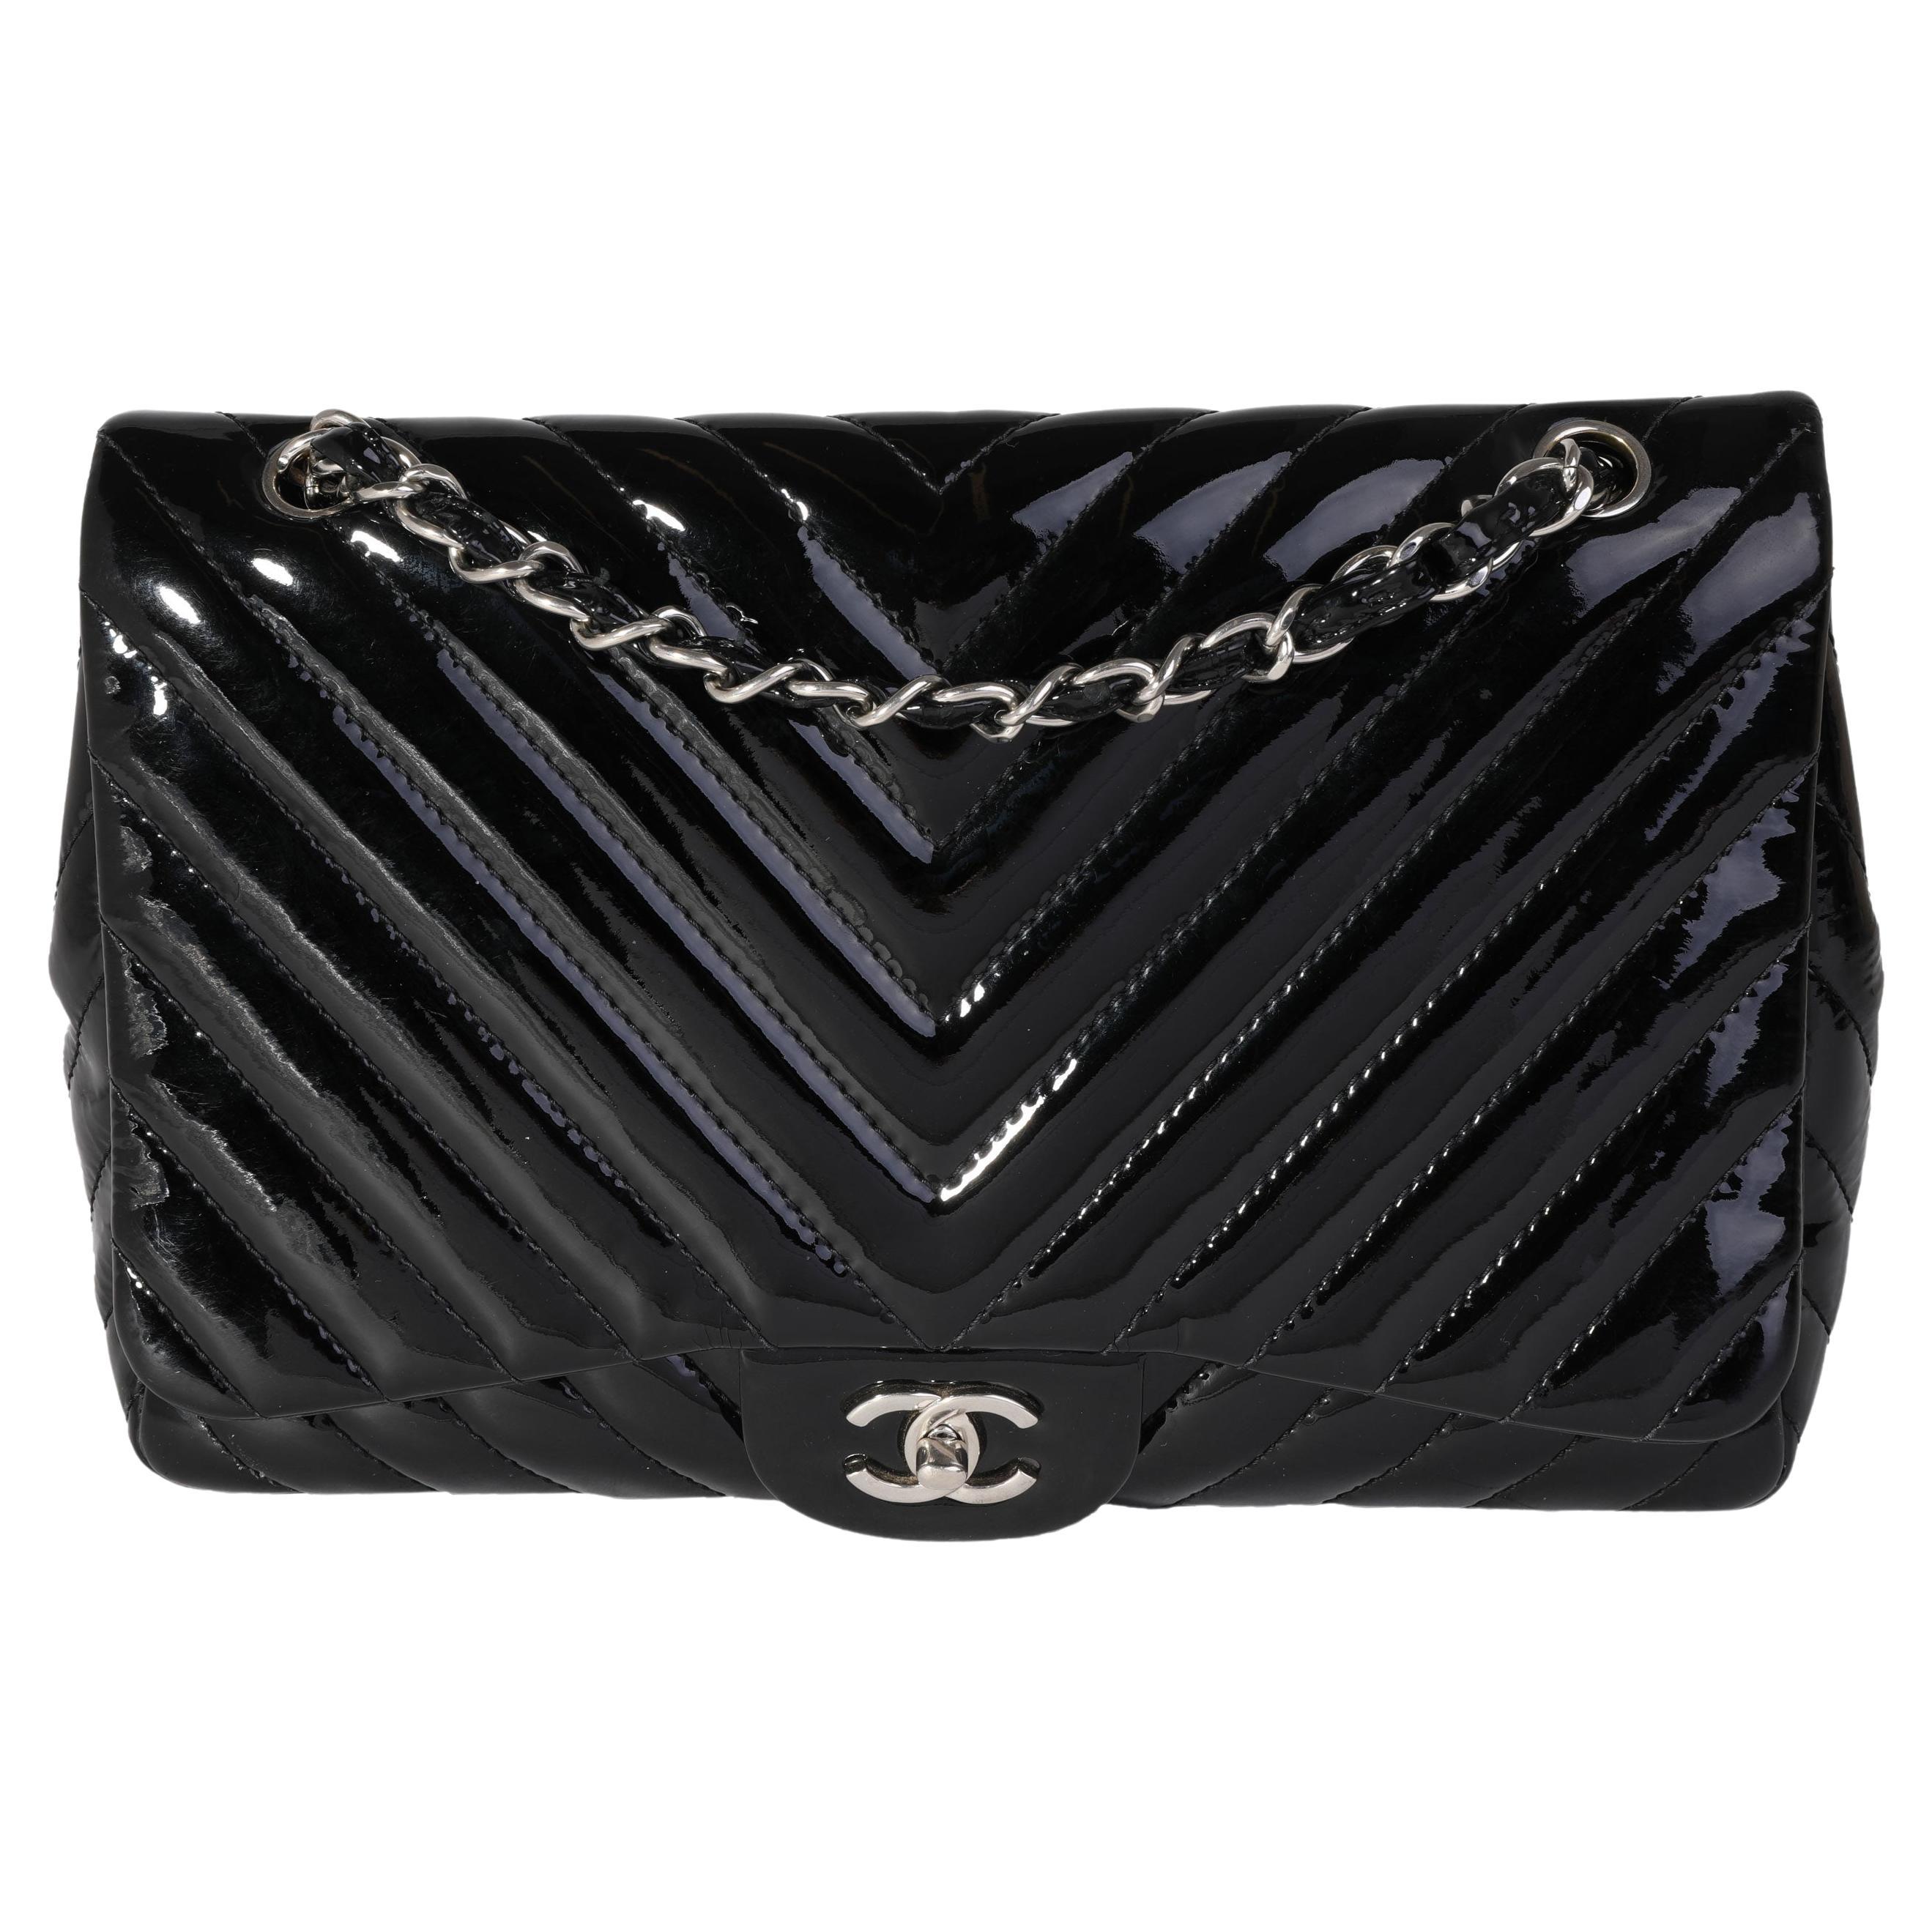 Chanel Black Chevron Quilted Patent Leather Jumbo Classic Single Flap Bag